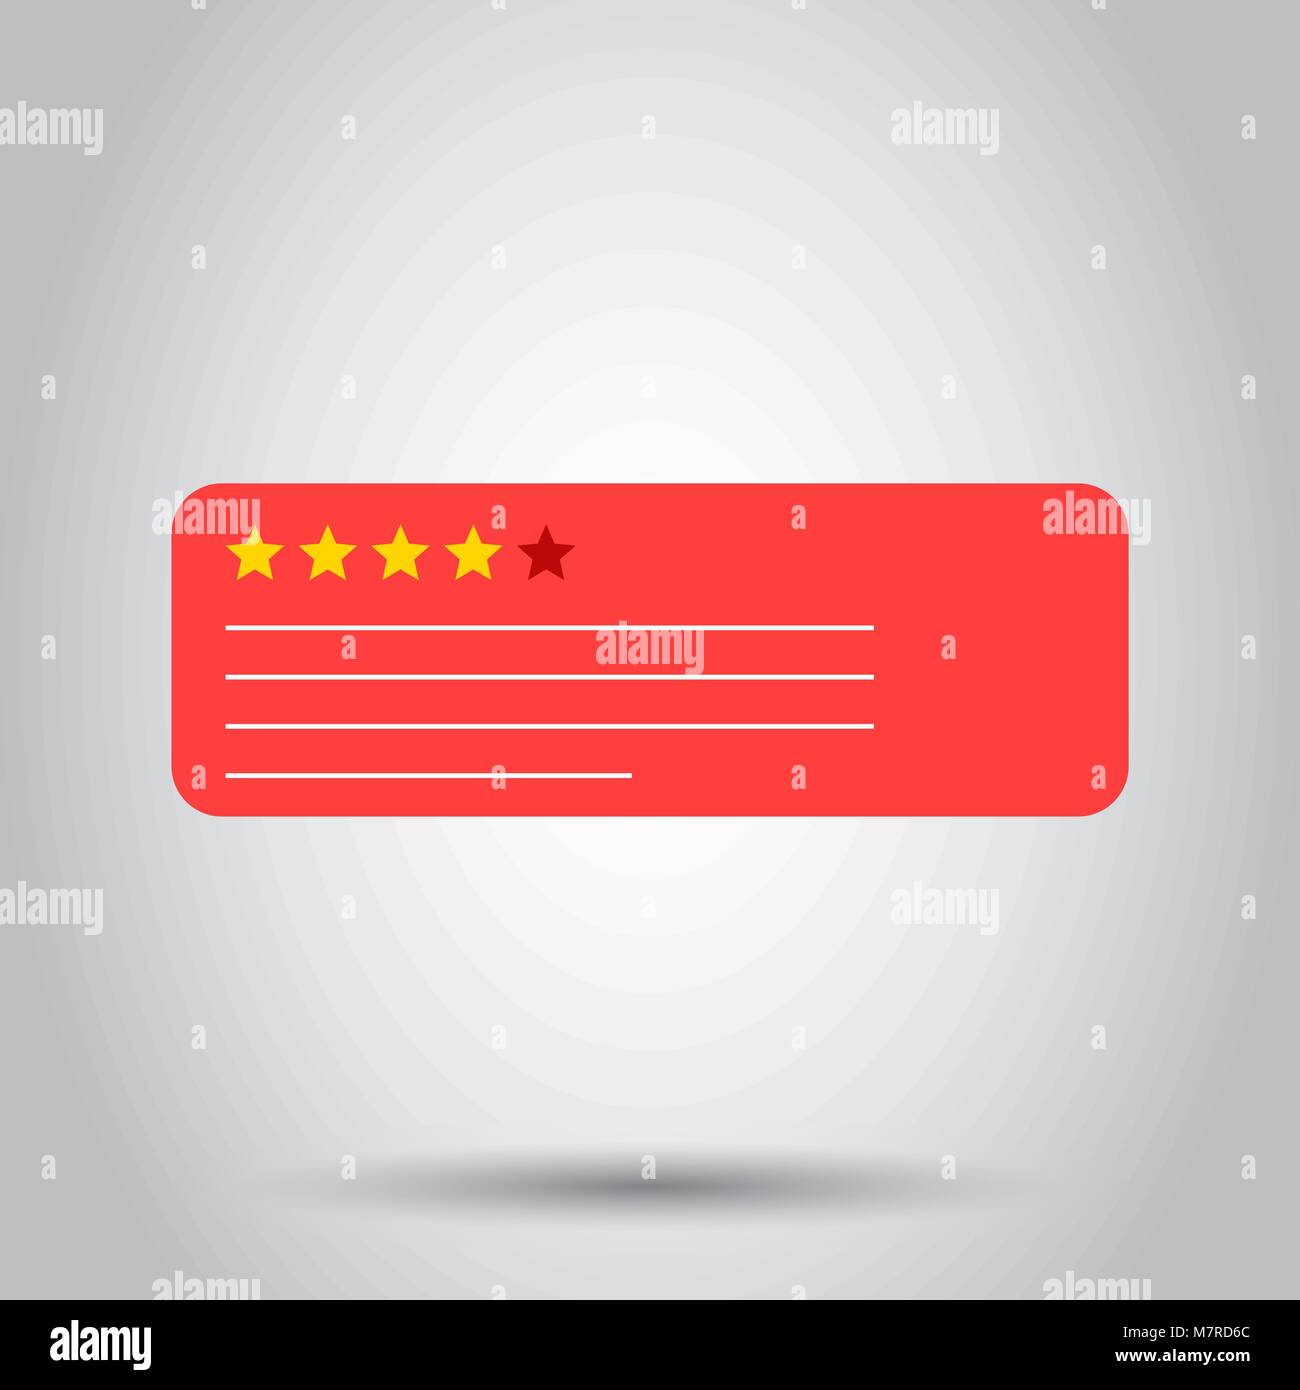 Review feedback rating bubble with star icon. Vector illustration on white background. Business concept customer rate pictogram. Stock Vector